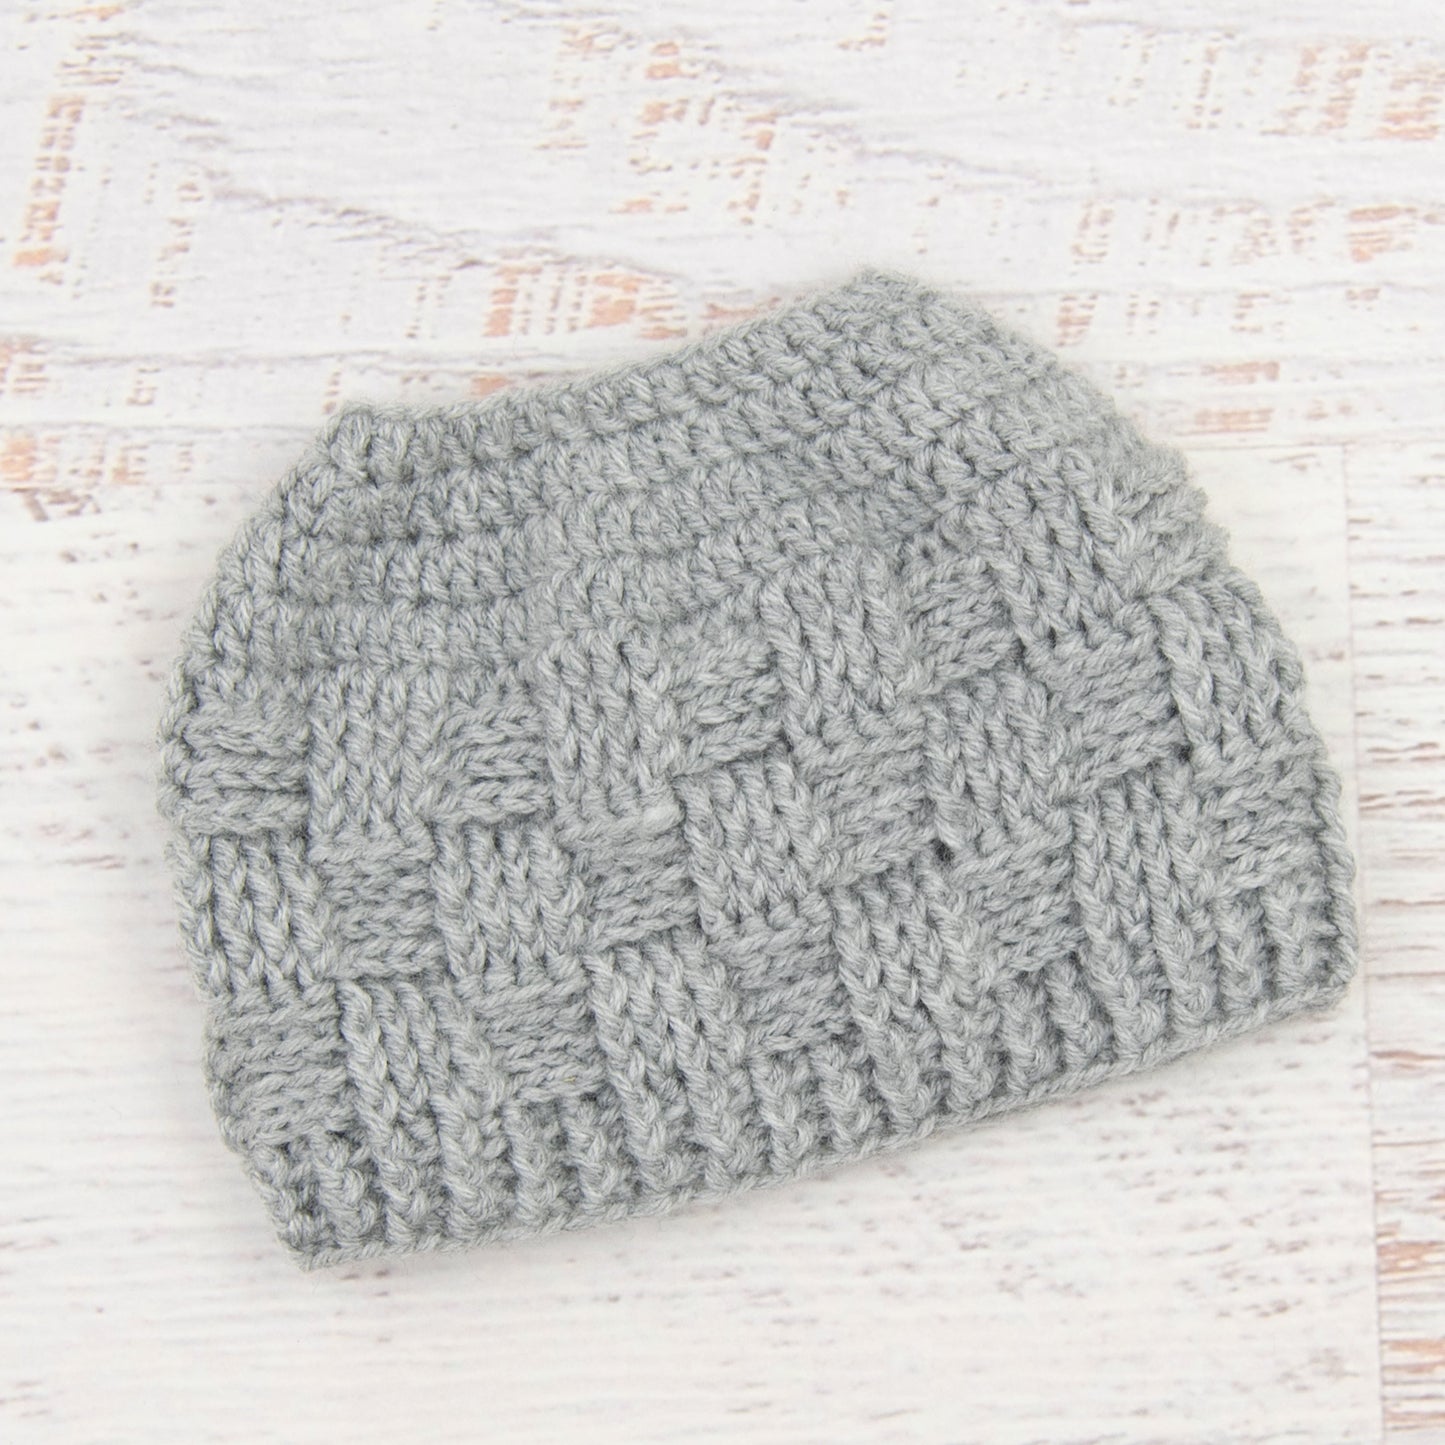 In-Stock 3-10 Year The 'Everyday' Messy Bun Hat in Silver Heather